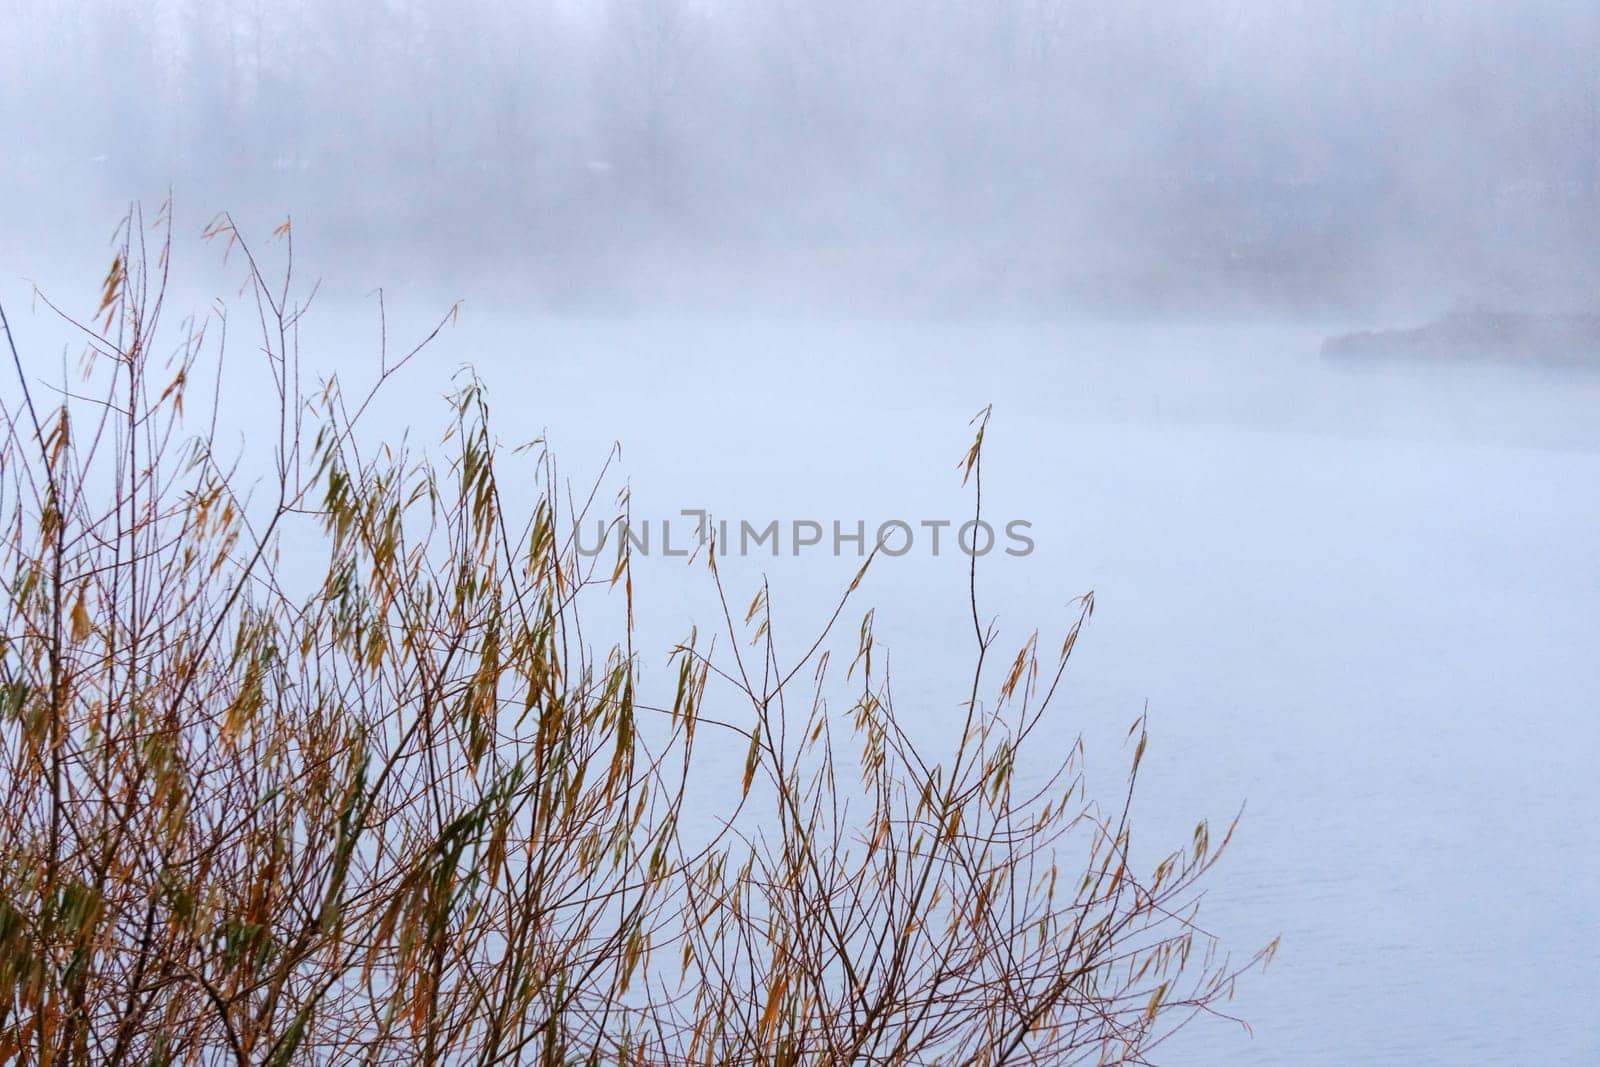 Foggy Serenity: A Mystical Landscape of a Lake with Trees in the Background by darksoul72